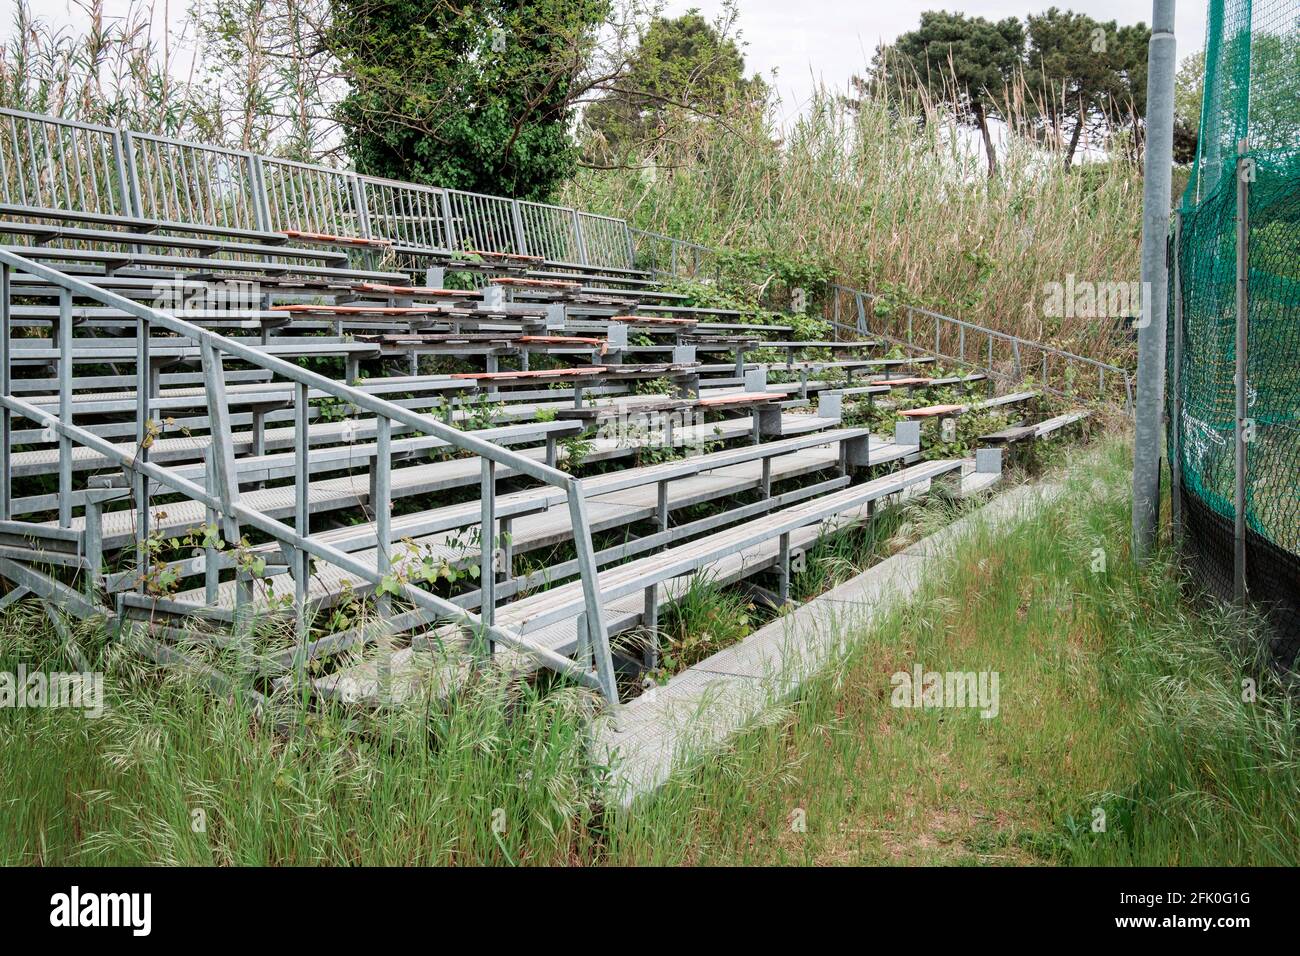 abandoned-bleachers-in-front-of-a-baseball-court-in-tuscany-italy-2FK0G1G.jpg